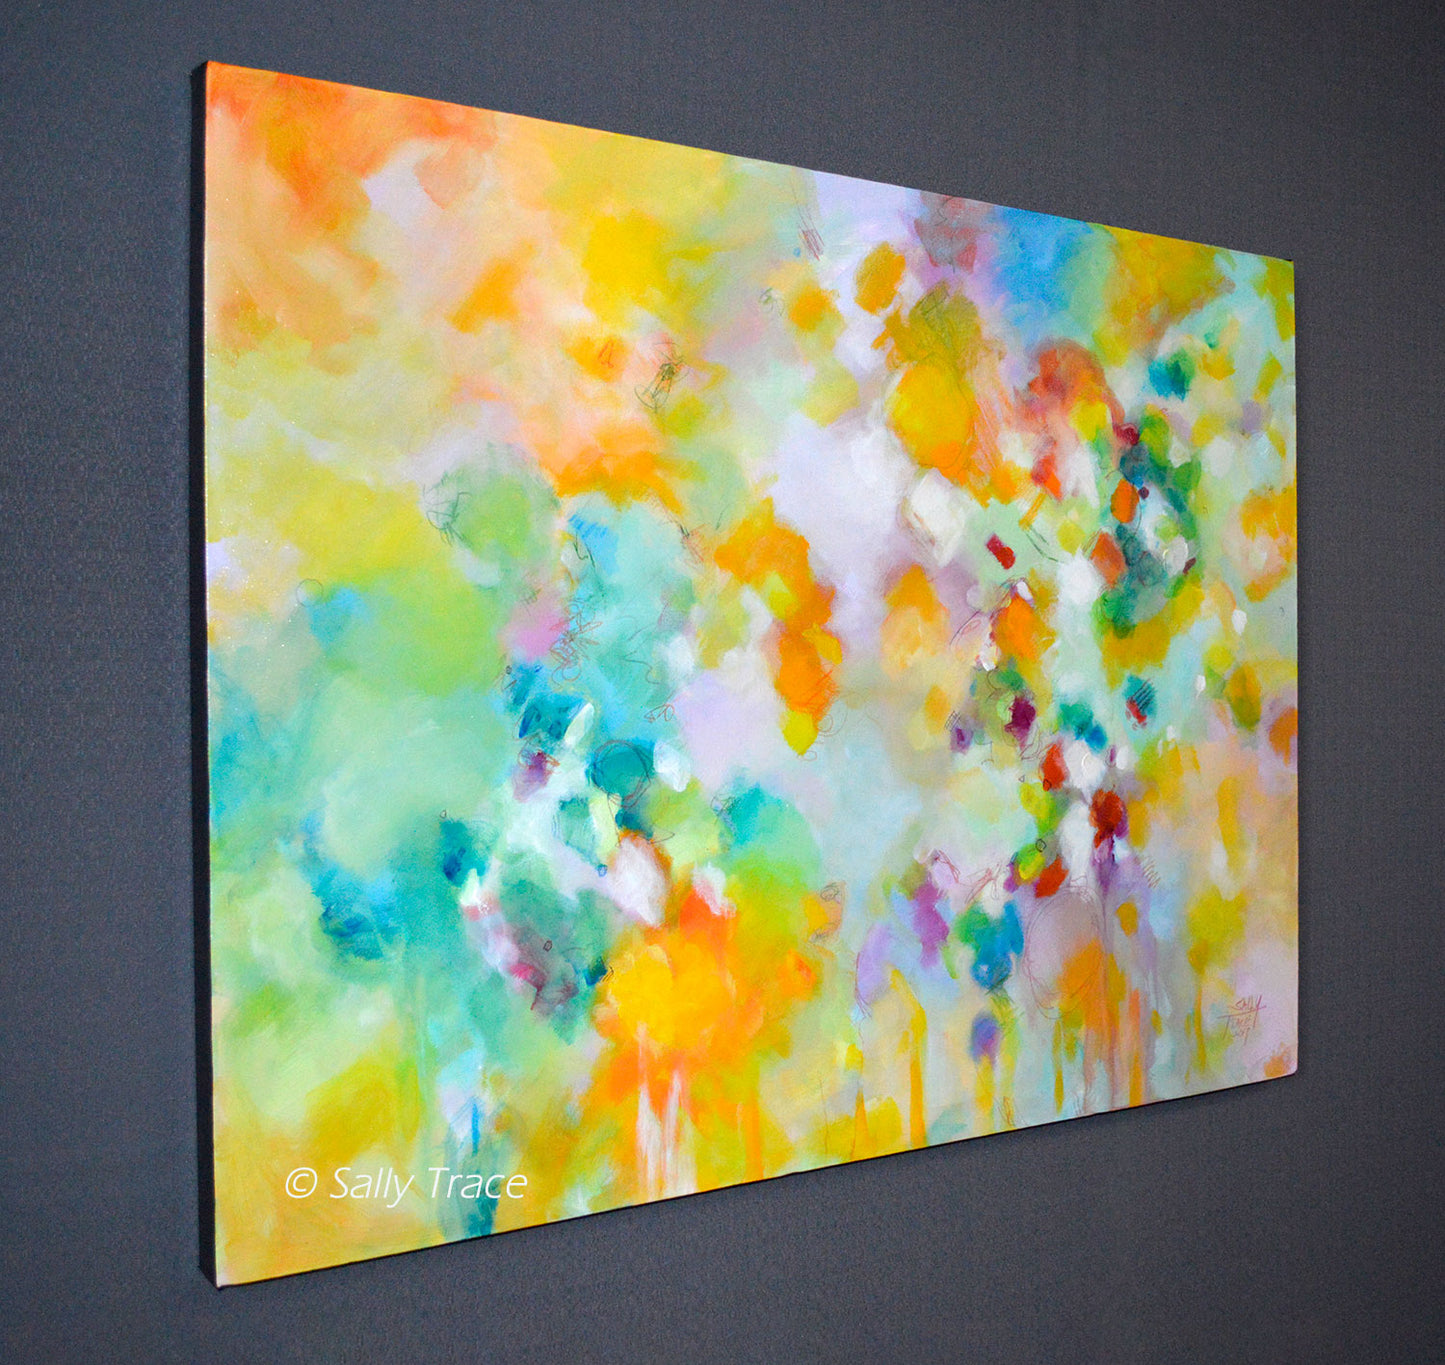 Modern art painting for sale "Lightness" by Sally Trace